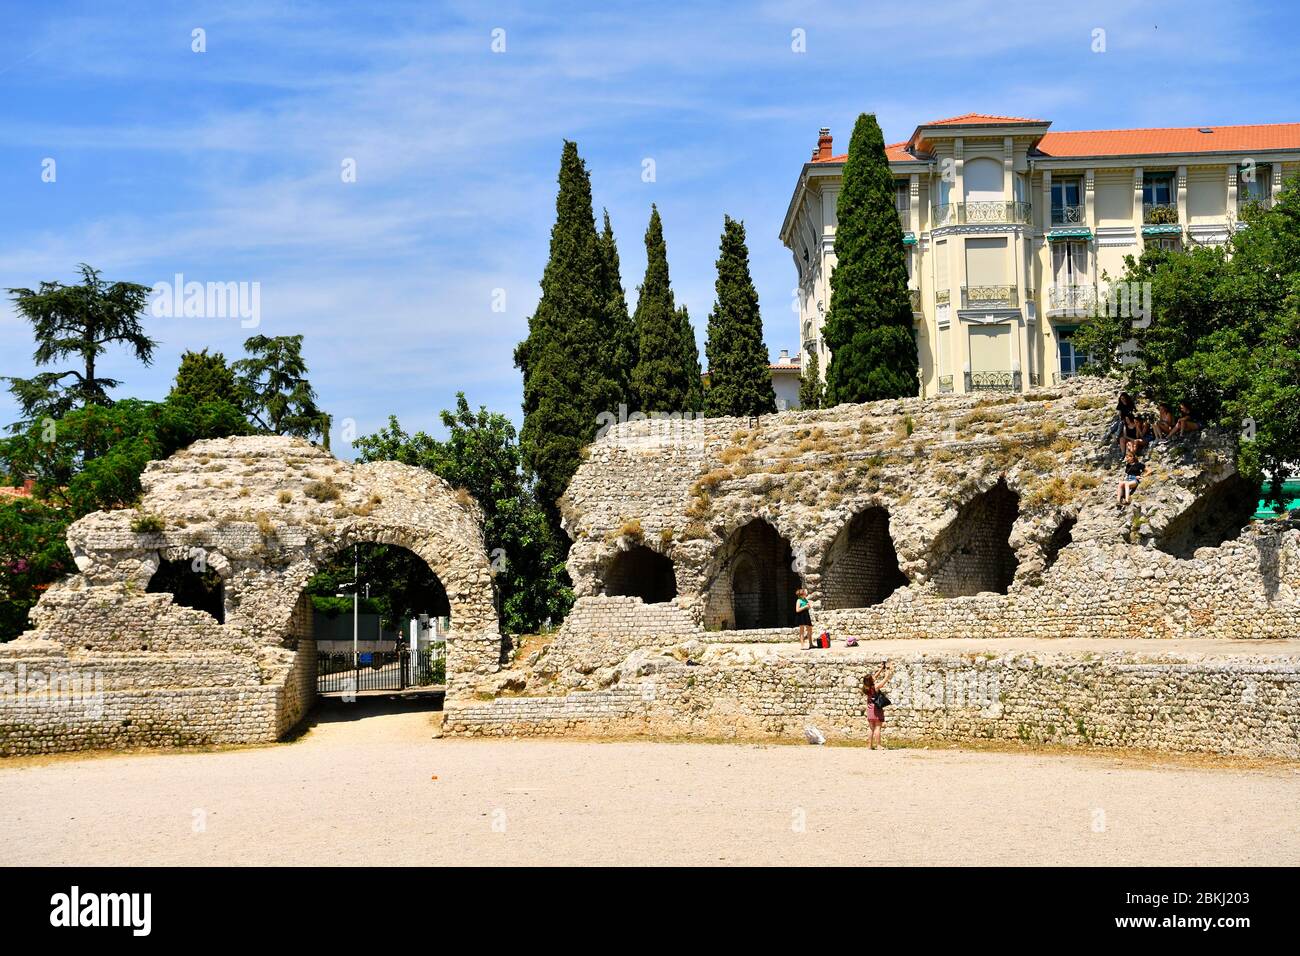 France, Alpes Maritimes, Nice, Cimiez Hill district, archaeological site, the amphitheater of the ancient Roman city of Cemenelum Stock Photo